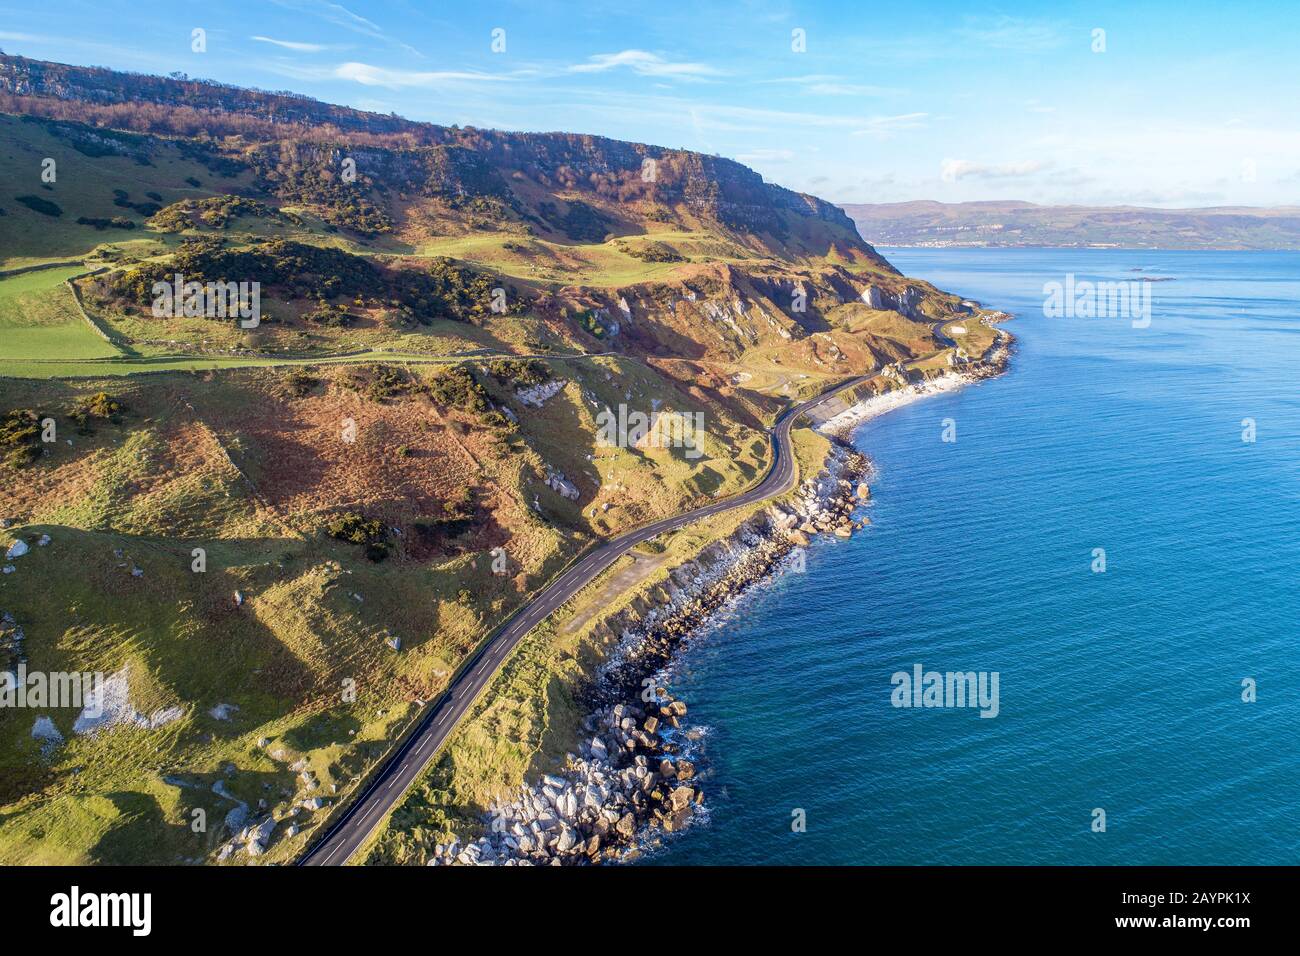 Atlantic coast of Northern Ireland, Antrim Coast Road, a.k.a Causeway Coastal Route,  One of the most scenic coastal roads in Europe. Aerial view Stock Photo